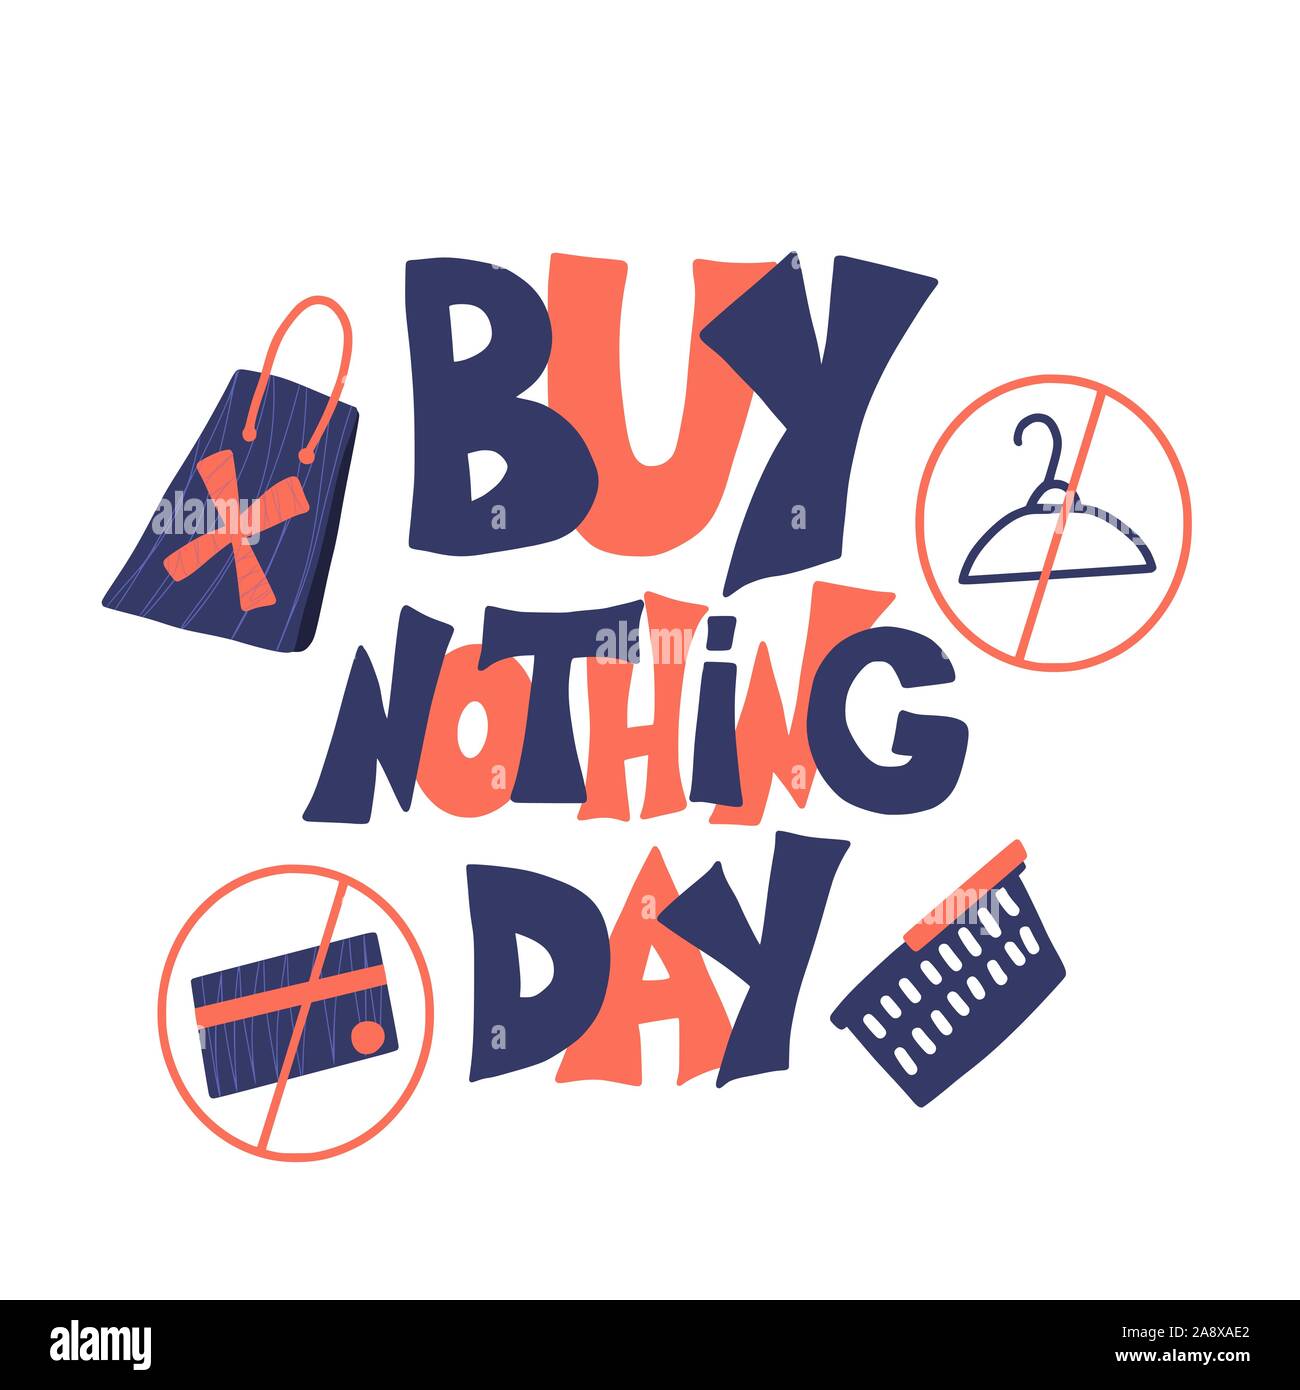 Buy nothing day text with decoration isolated on white background. Stop shopping symbol date. International day of protest against consumerism. Vector Stock Vector